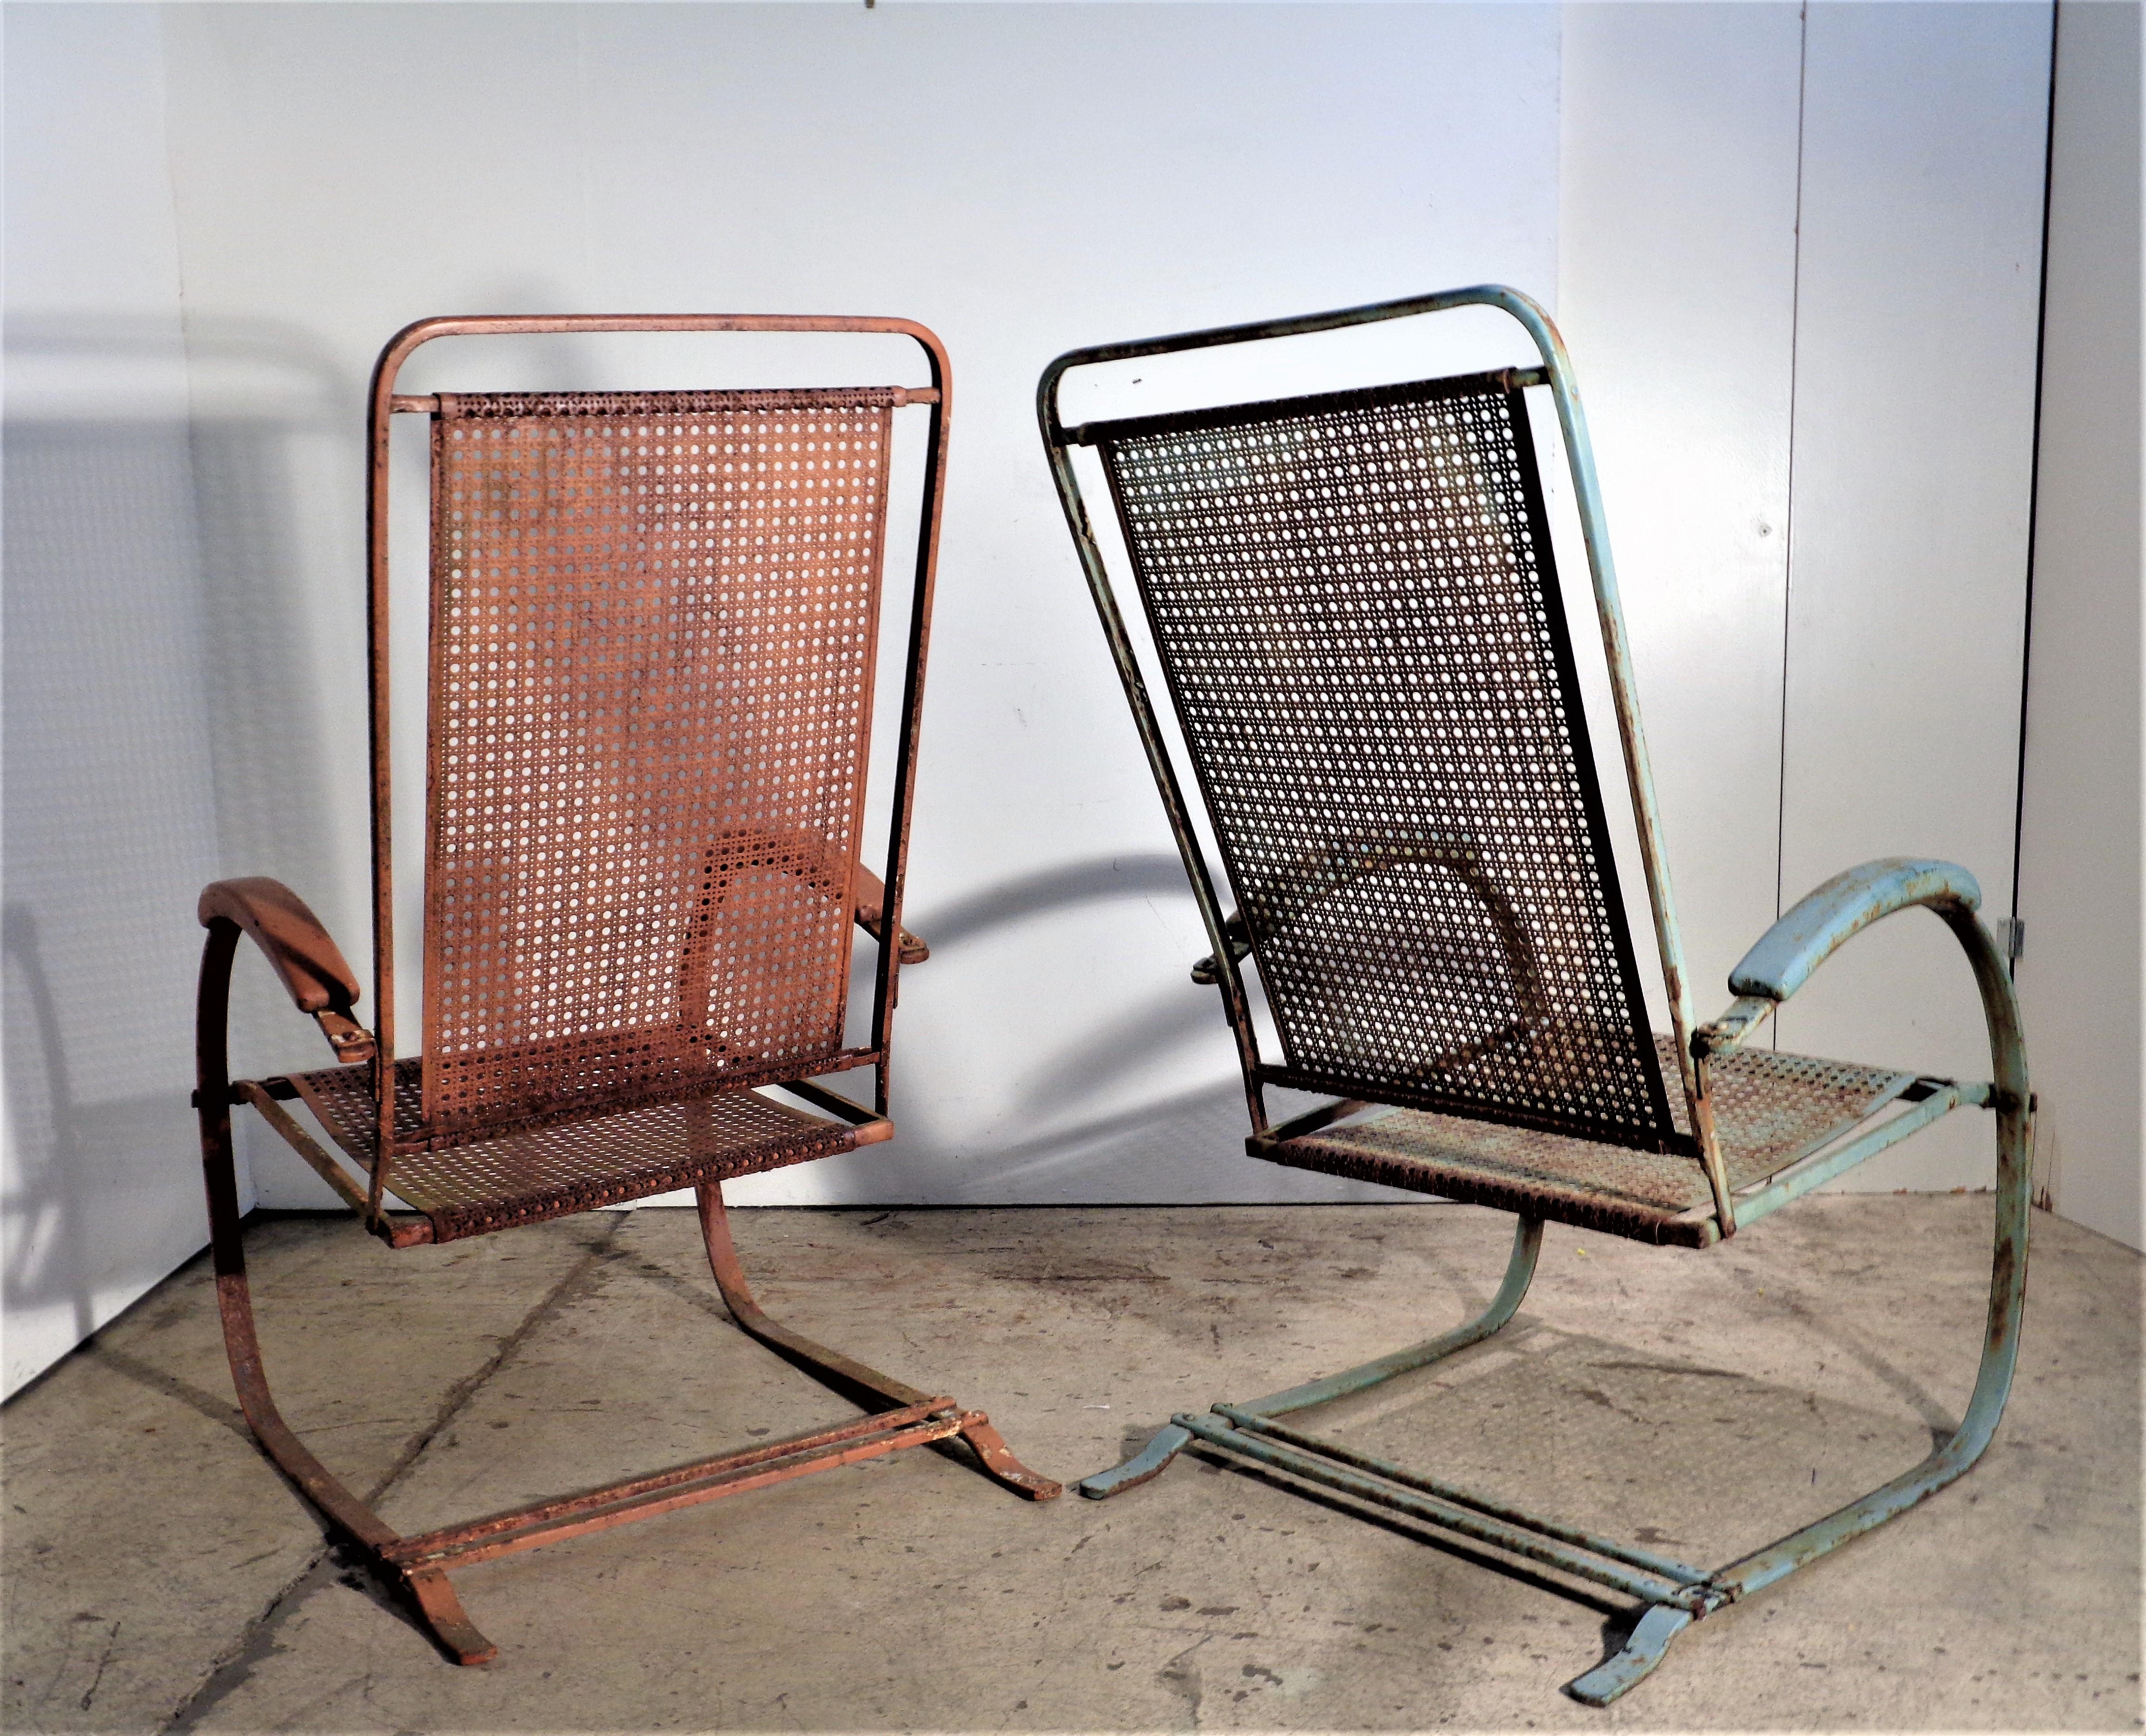 Machine Age   Classic Metal Mesh Spring Steel Cantilever Bounce Chairs - Howell Co. 1930's